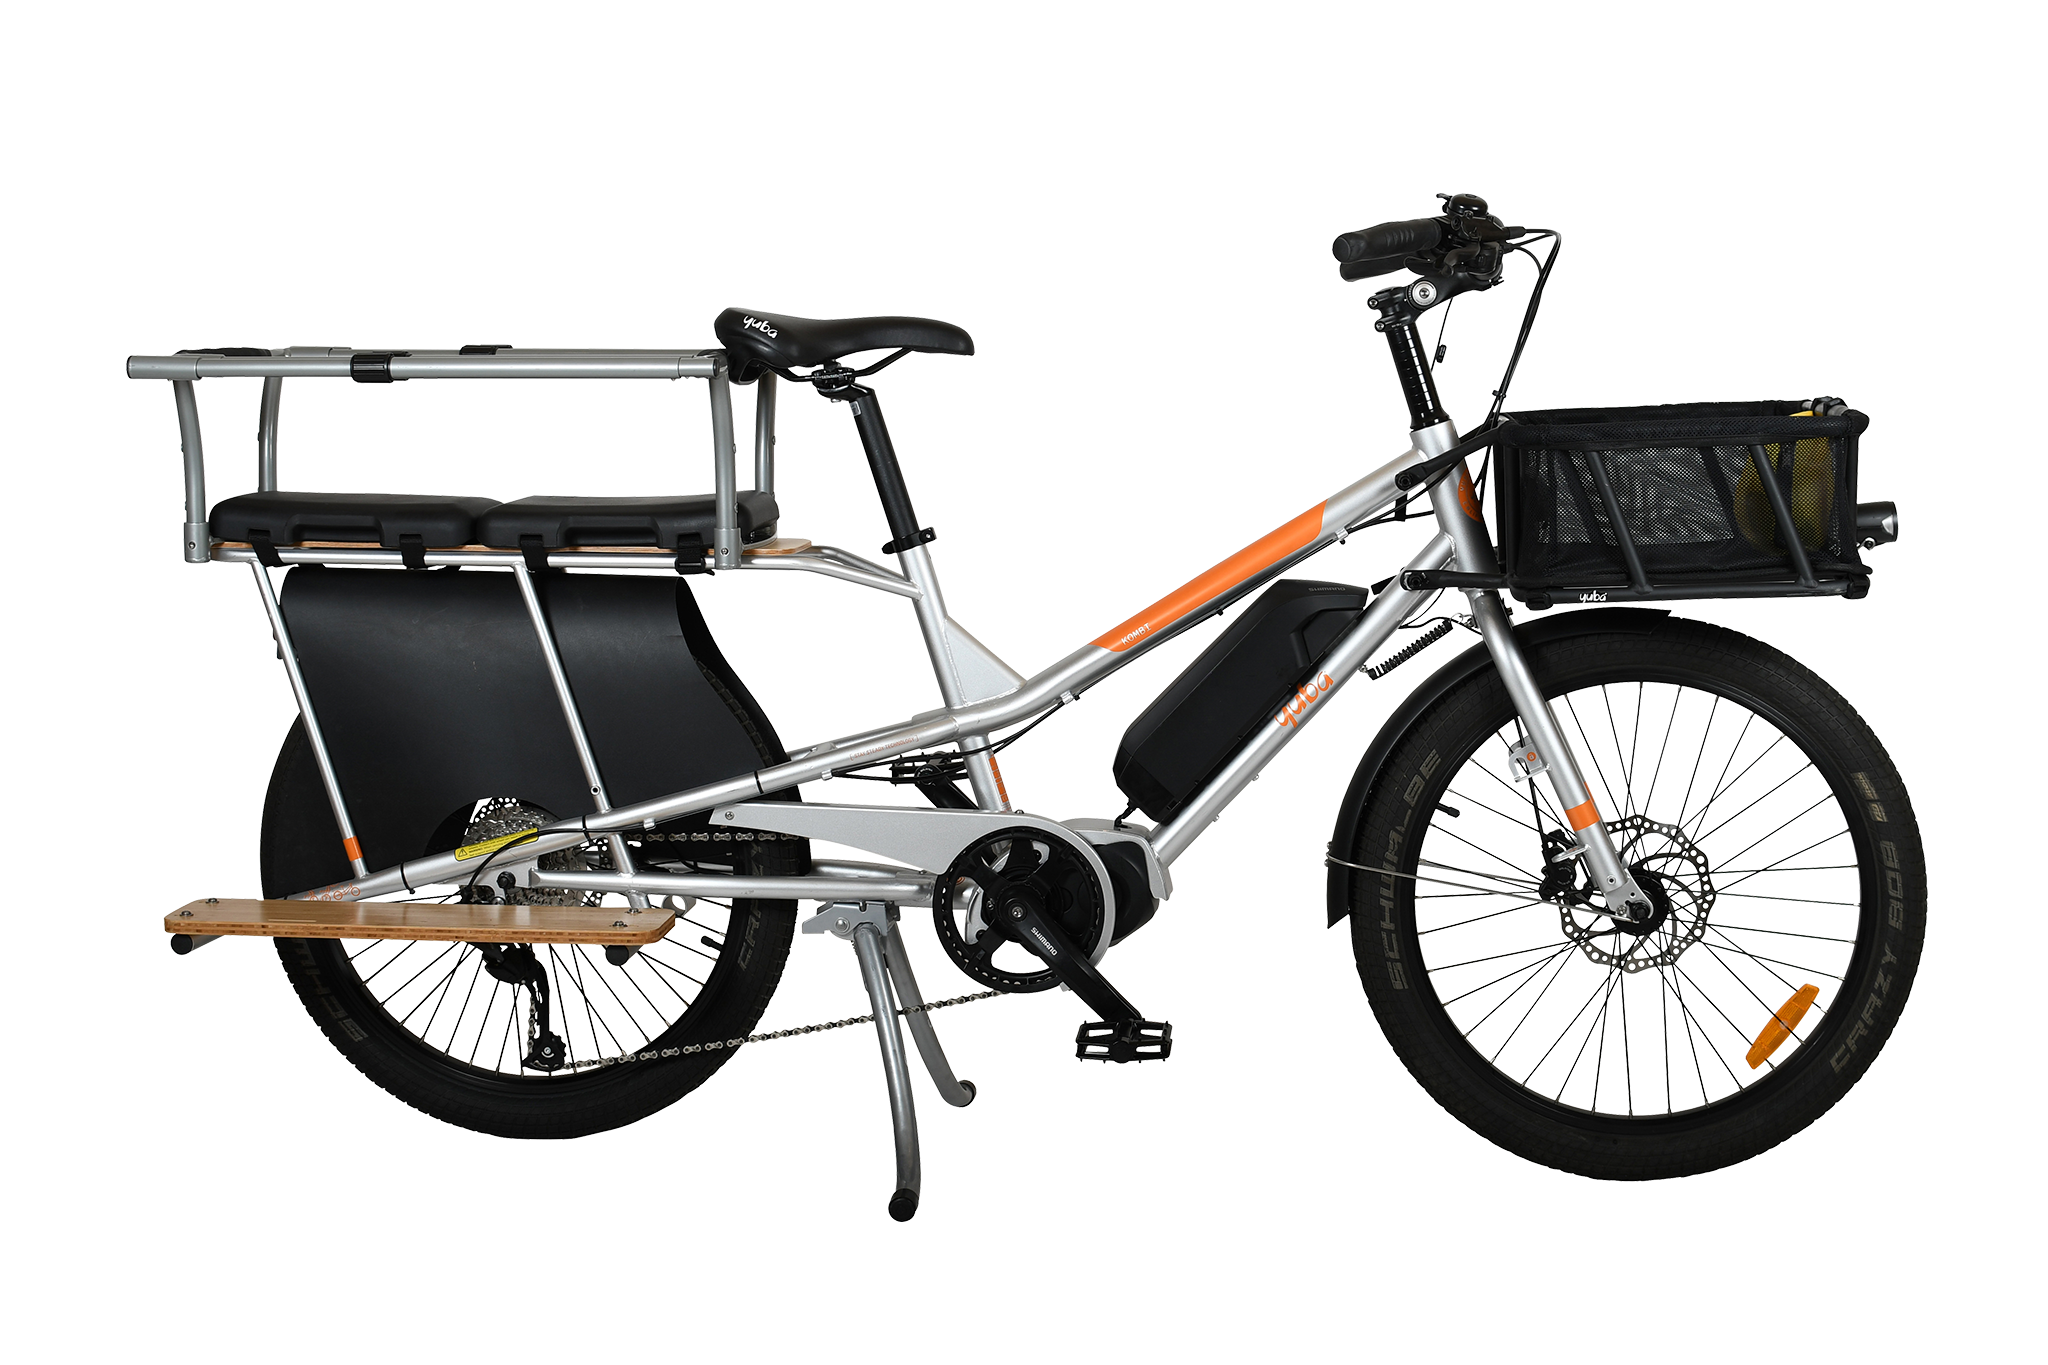 A product image of the Yuba Kombi E5 electric longtail cargo bike which can be hired from LeaseBike. The photo shows the right side of the cargo bike. The photo shows two soft spot seats and a monkey bar accessory attached to the rear rack and a bread basket attached to the front of the bike.